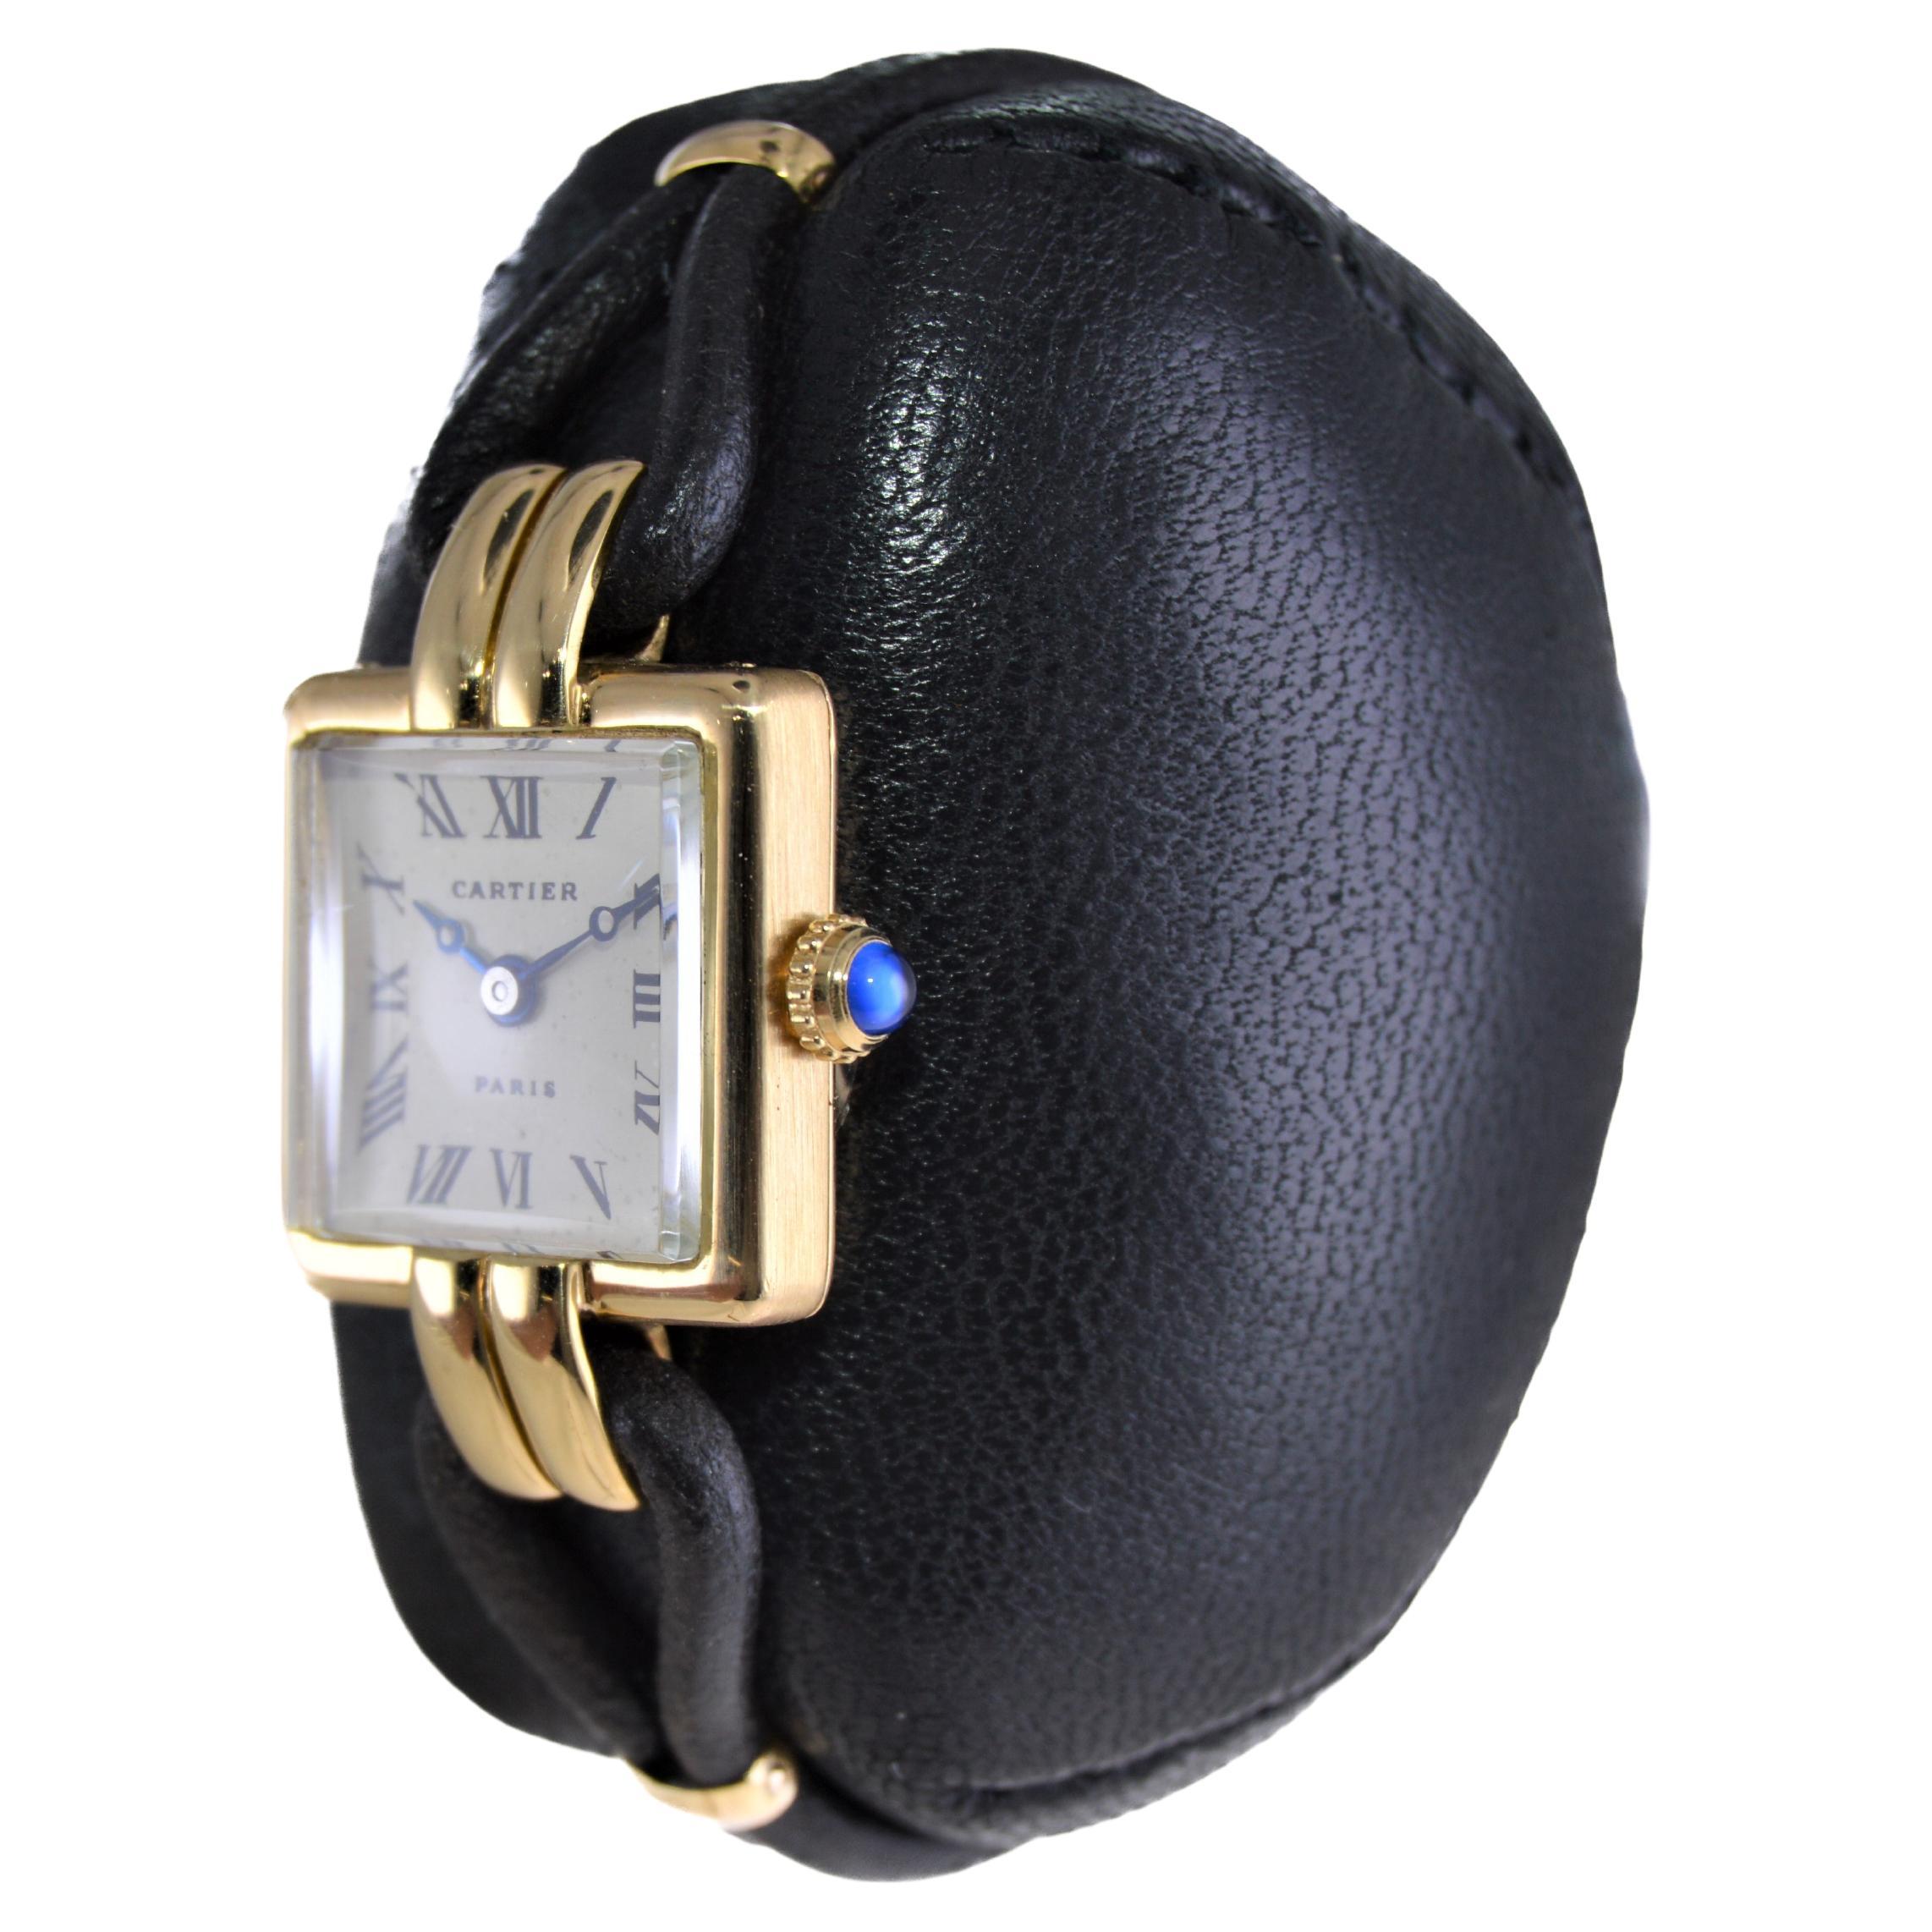 Women's Cartier 18Kt. Yellow Gold Art Deco Styled Watch with Original Buckle from 1930's For Sale